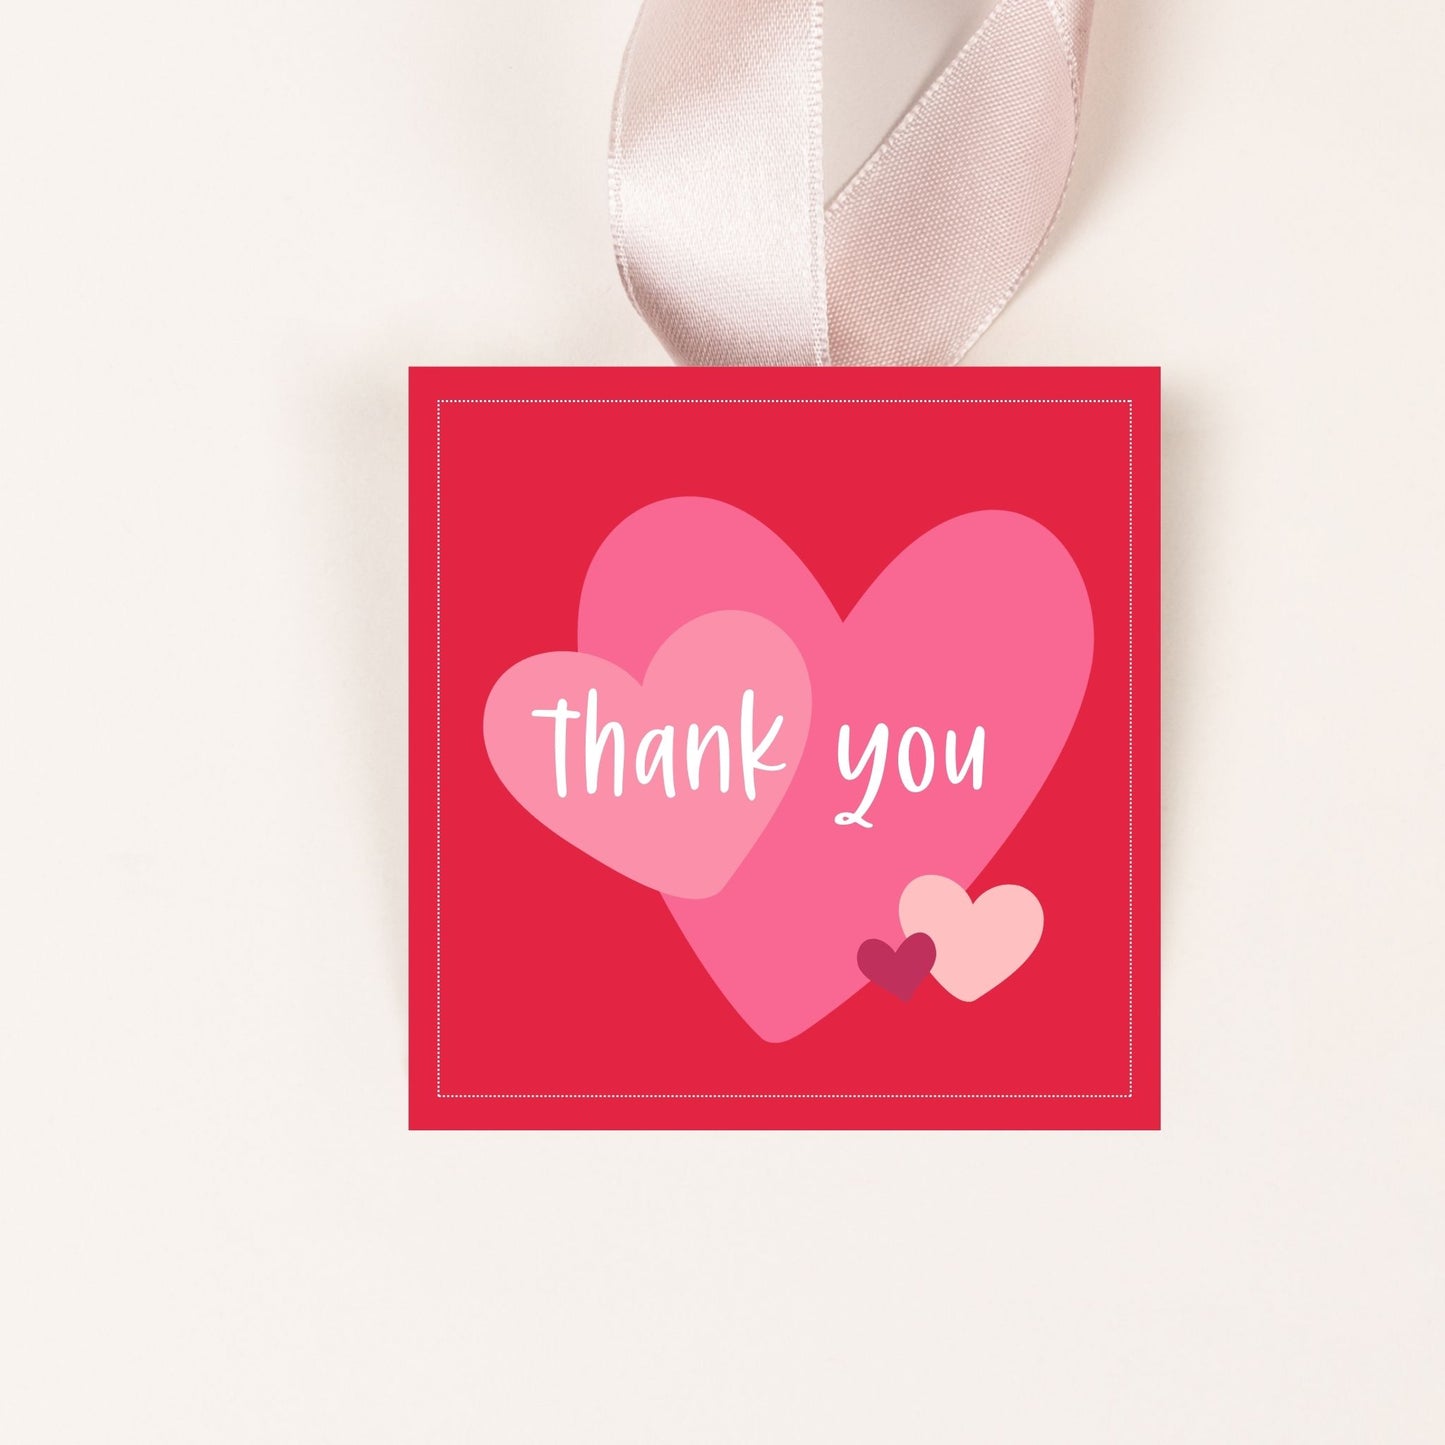 Galentine's Day Favor Tags Printables